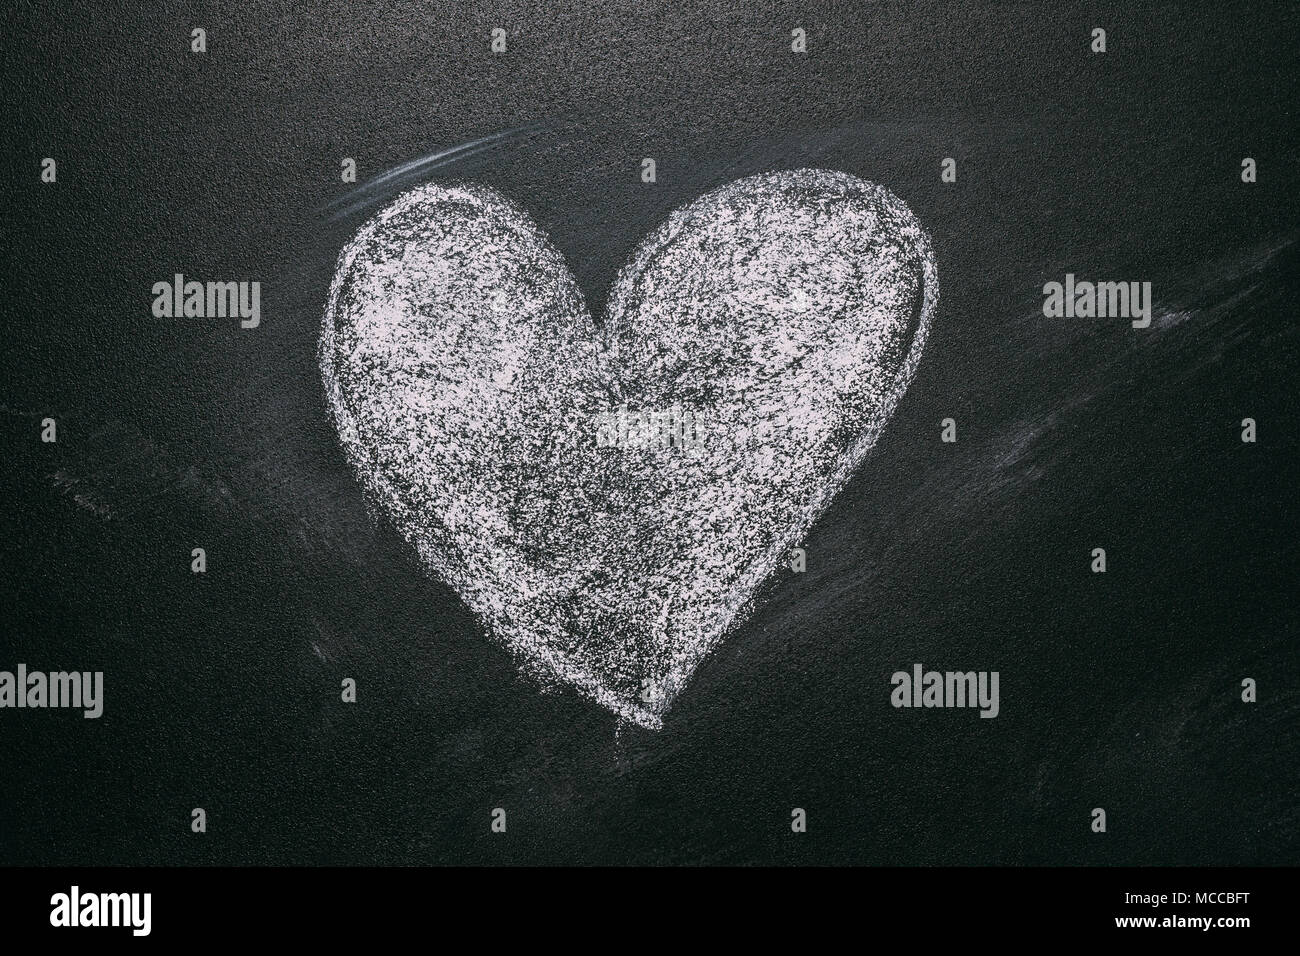 Love Heart Drawing On A School Chalkboard. Handwritten Message On A School Chalkboard Drawing With An Illustrated Heart Used As A Symbol, Concept Of L Stock Photo